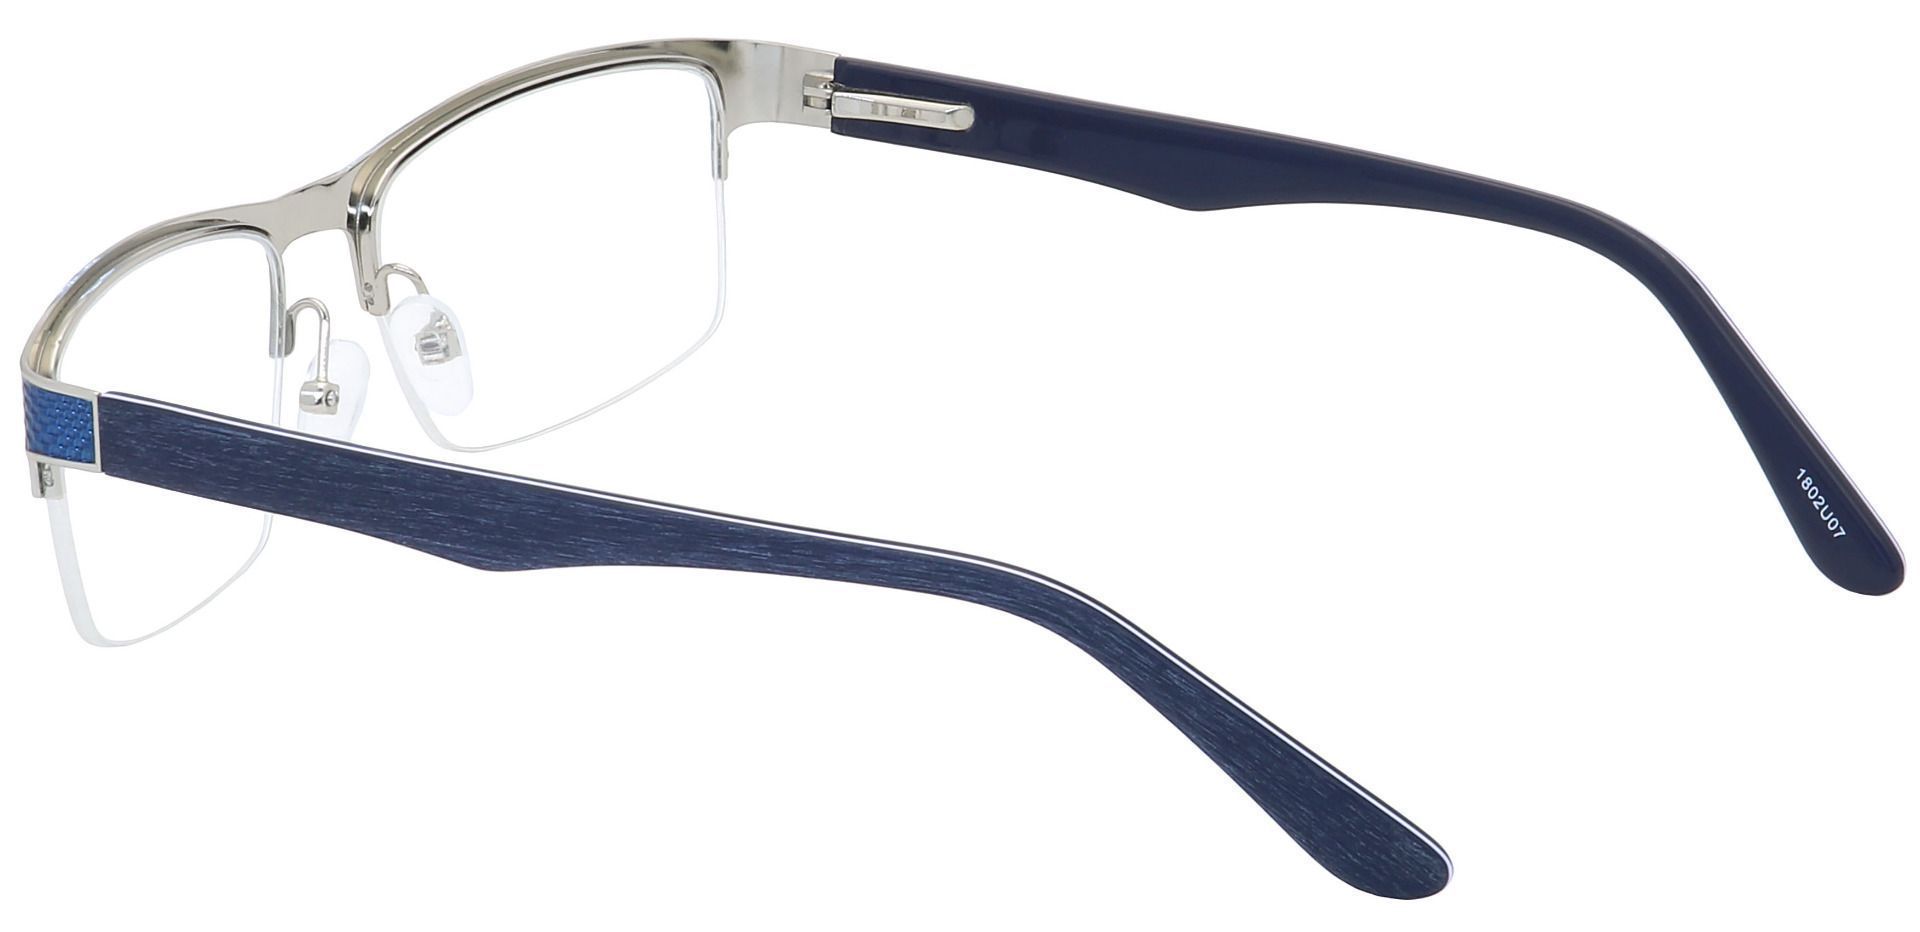 Executive Square Lined Bifocal Glasses - Blue